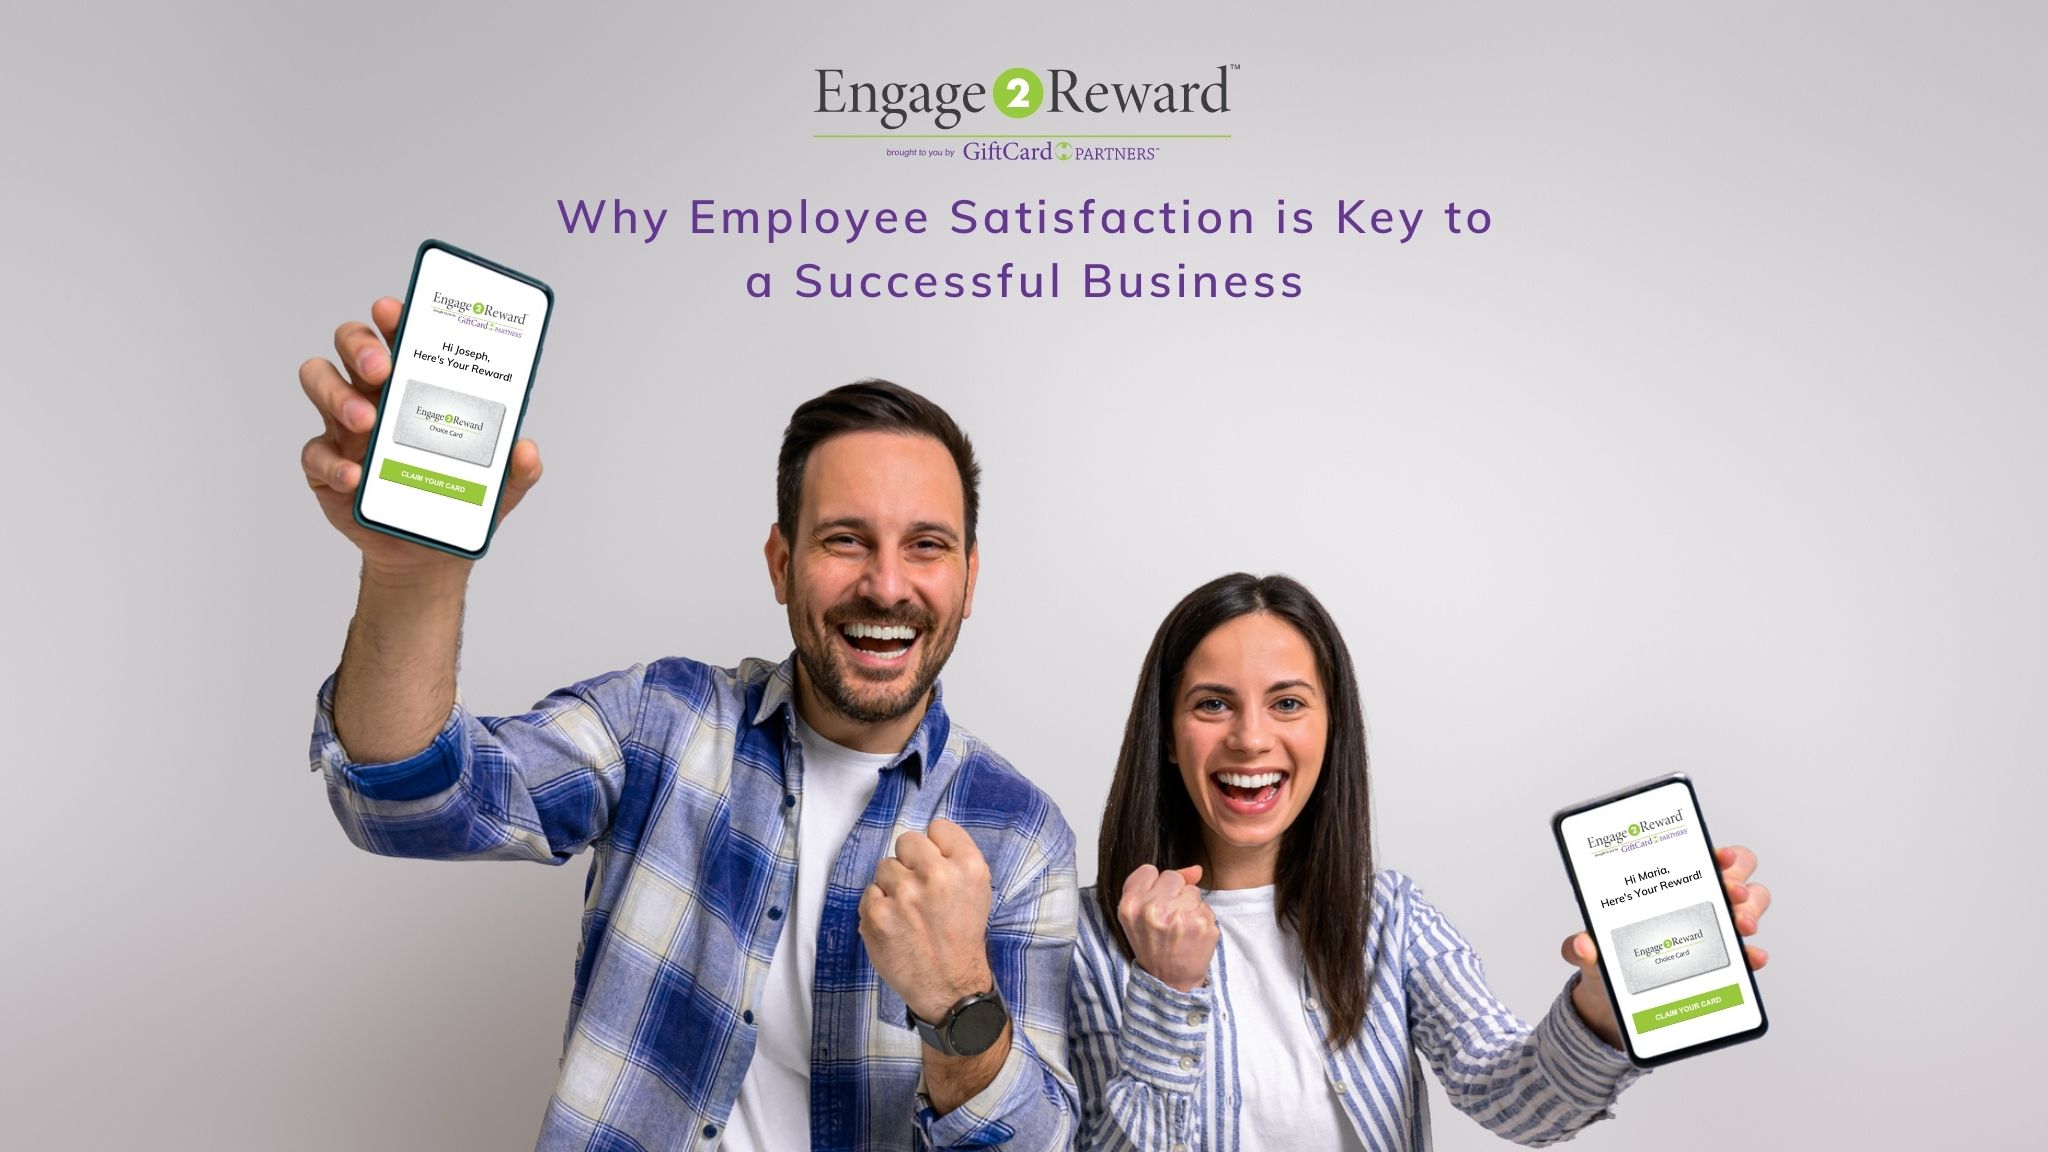 Why Employee Satisfaction is Key to a Successful Business